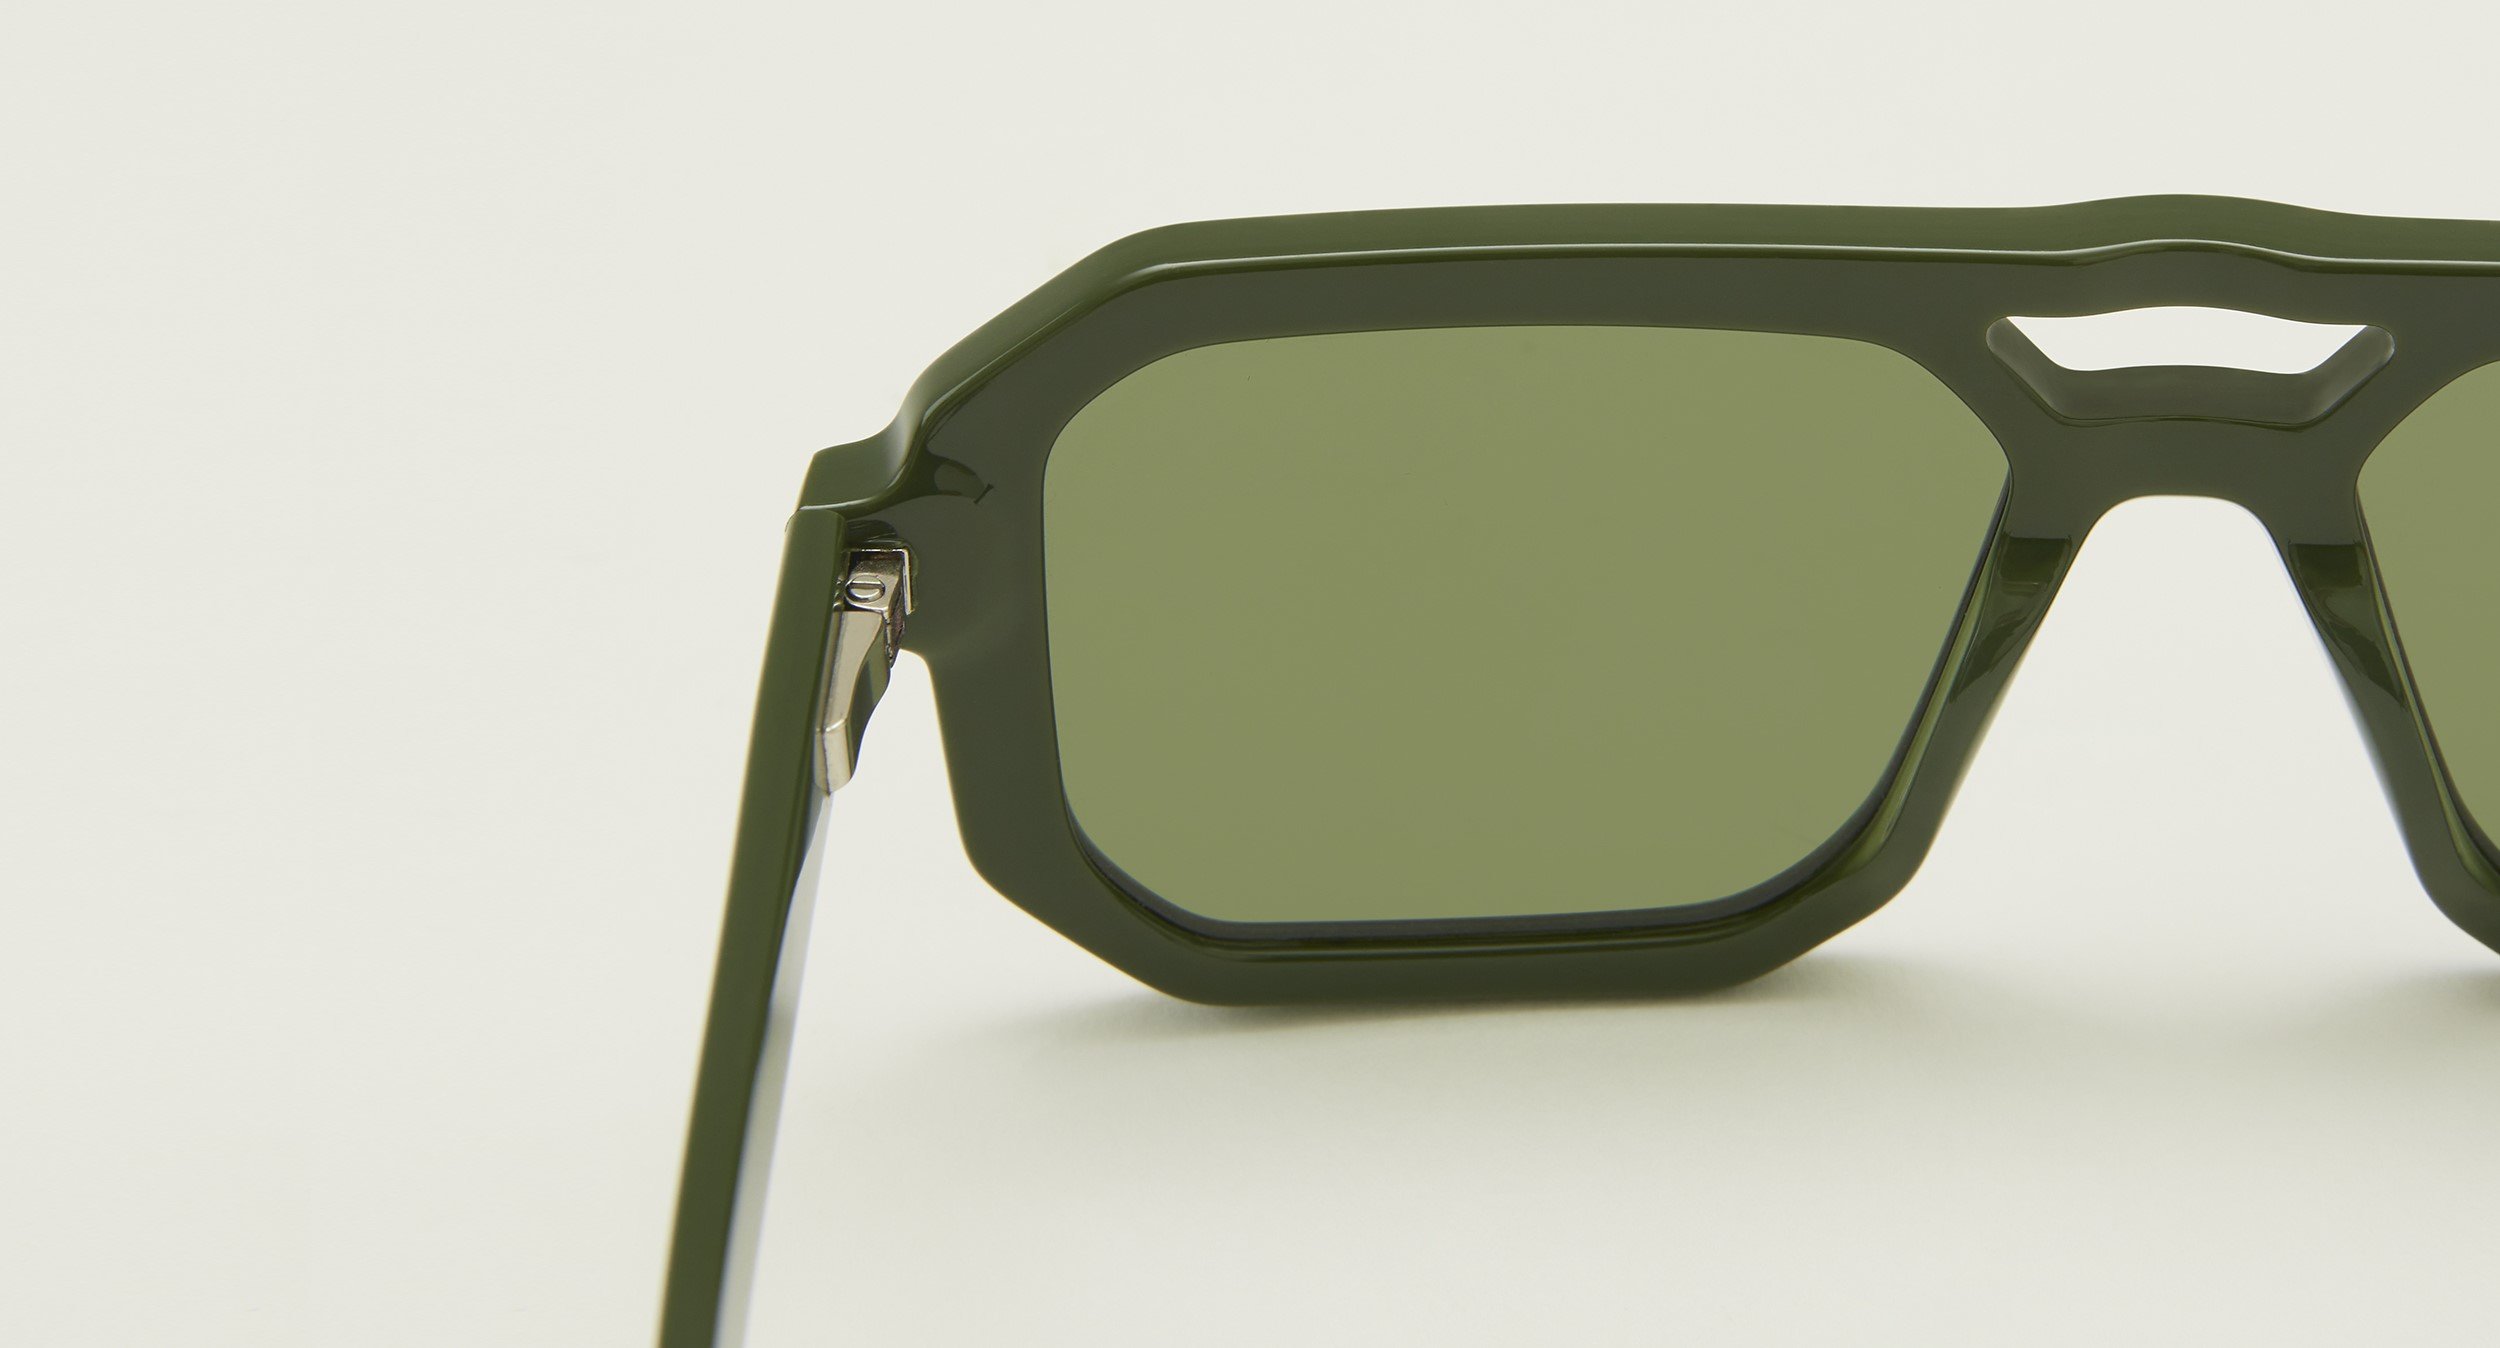 Photo Details of Angelo Blue Light Army Green Blue Light Glasses in a room